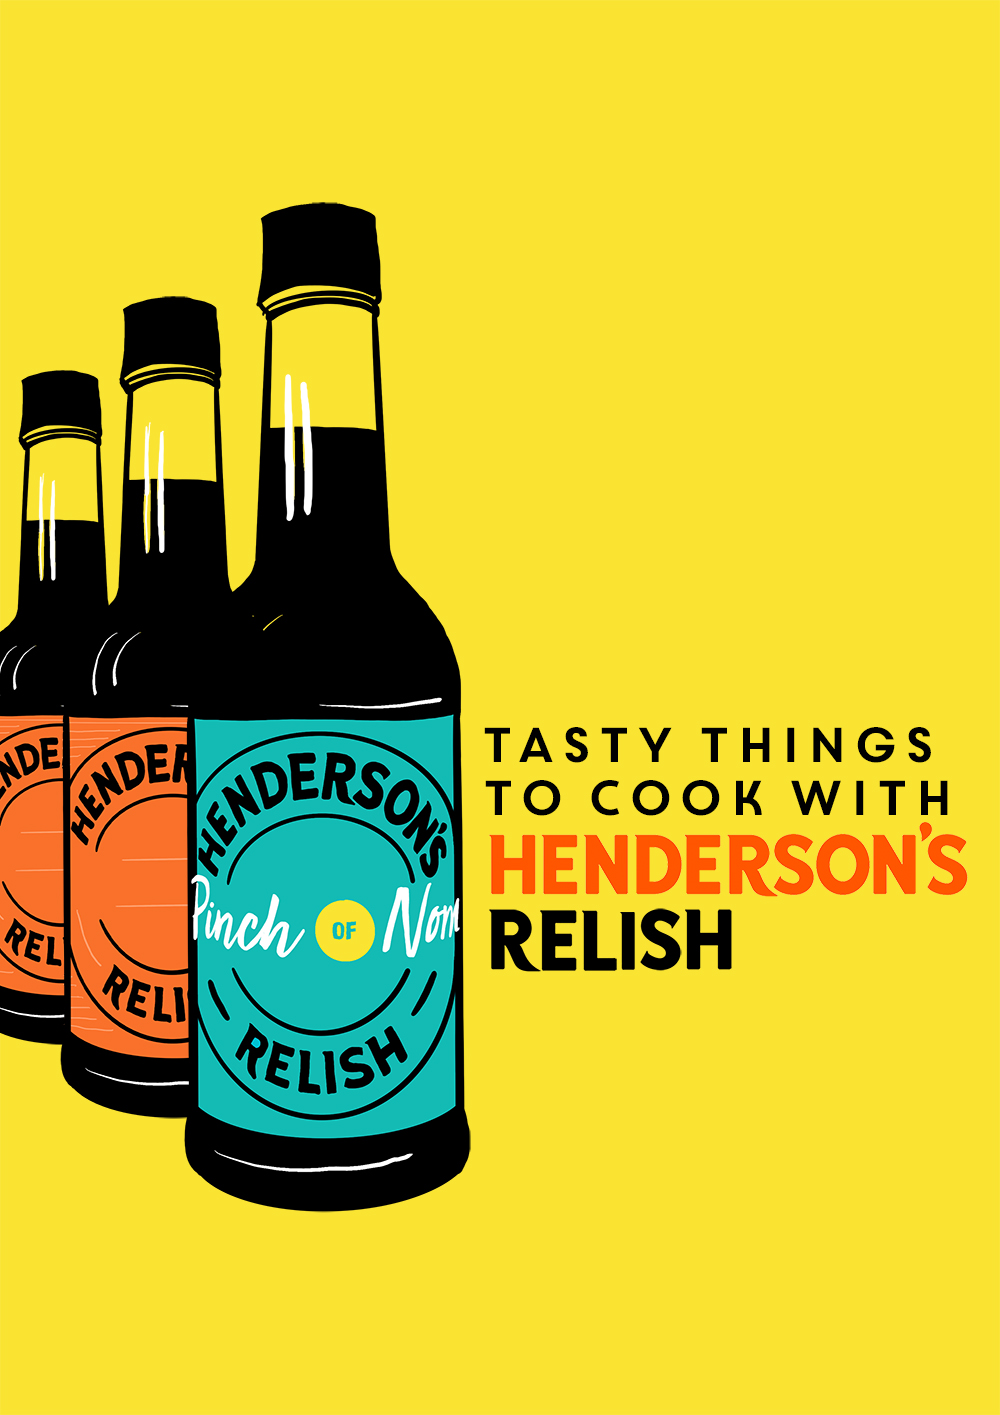 Tasty Things to Cook with Henderson's Relish - Pinch of Nom Slimming Recipes